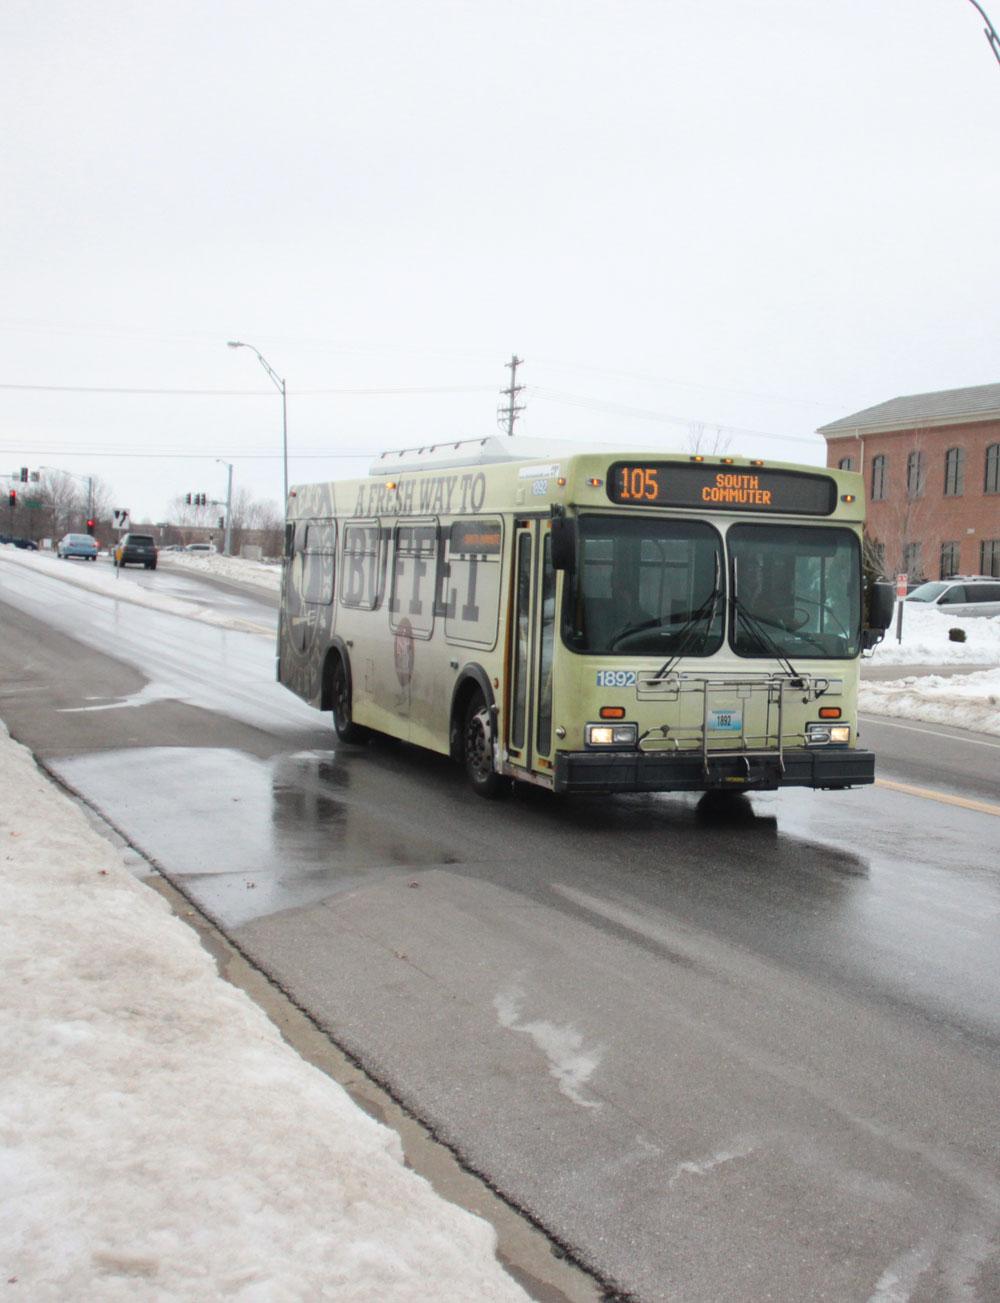 As part of transportation considerations for the future, the district may incorporate service from city buses for students. Photo by Adam Schoelz